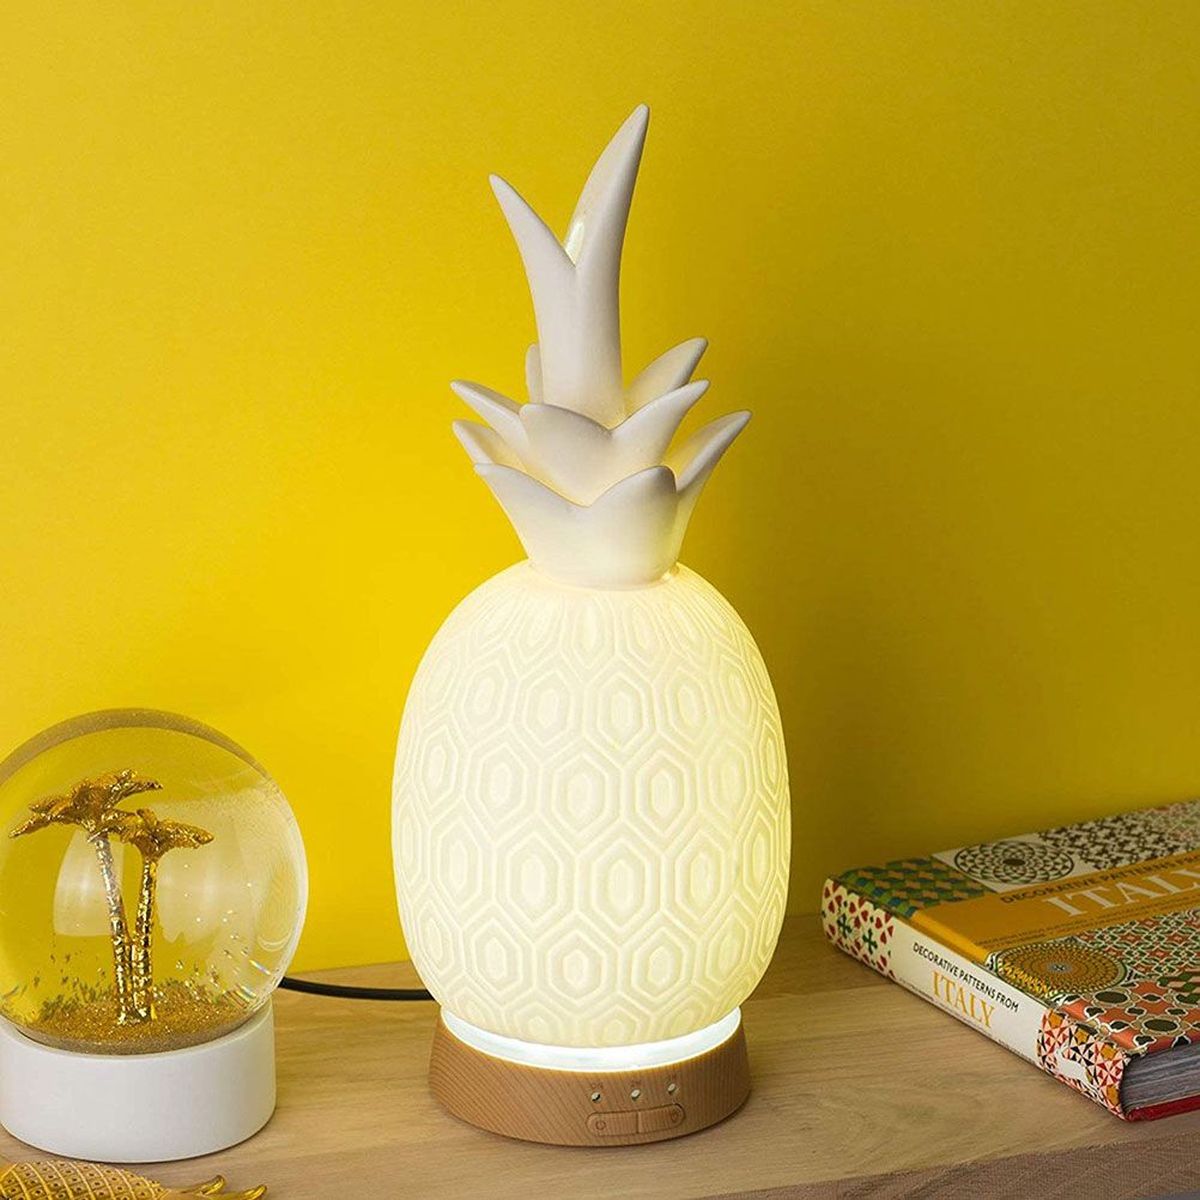 Cold Ultrasonic Diffuser of Essential Oils - Pineapple Shape